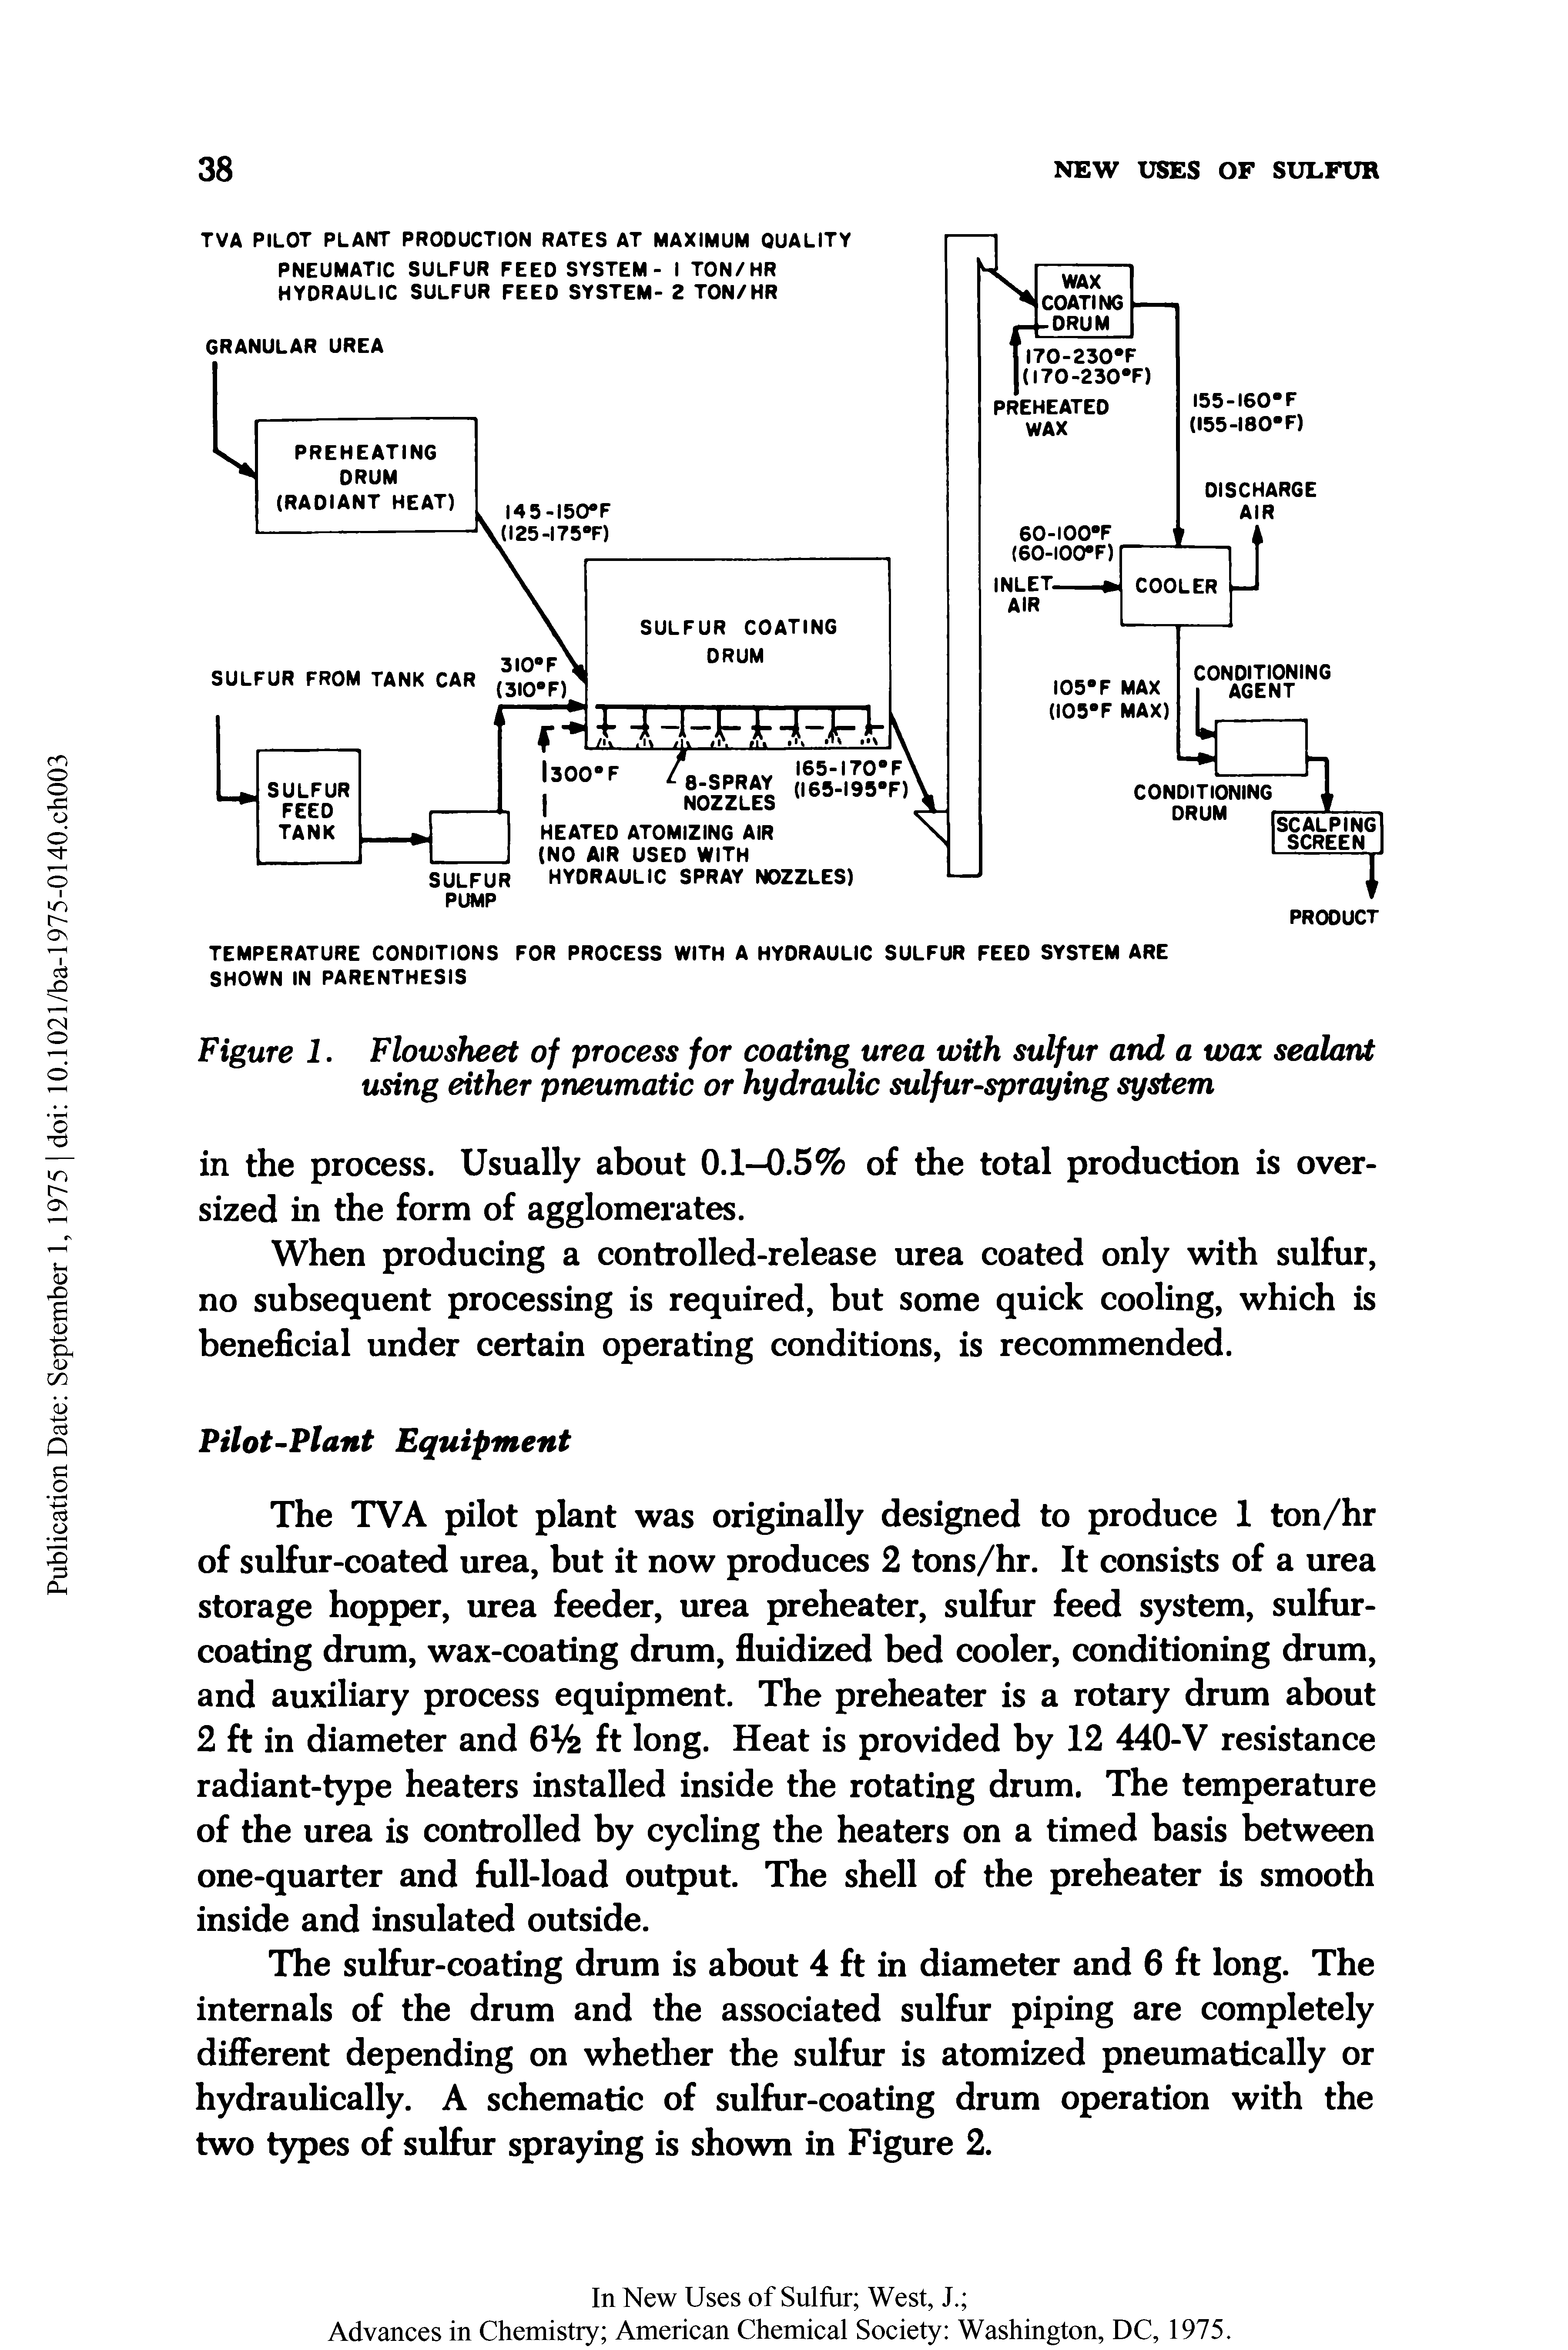 Figure 1. Flowsheet of process for coating urea with sulfur and a wax sealant using either pneumatic or hydraulic sulfur-spraying system...